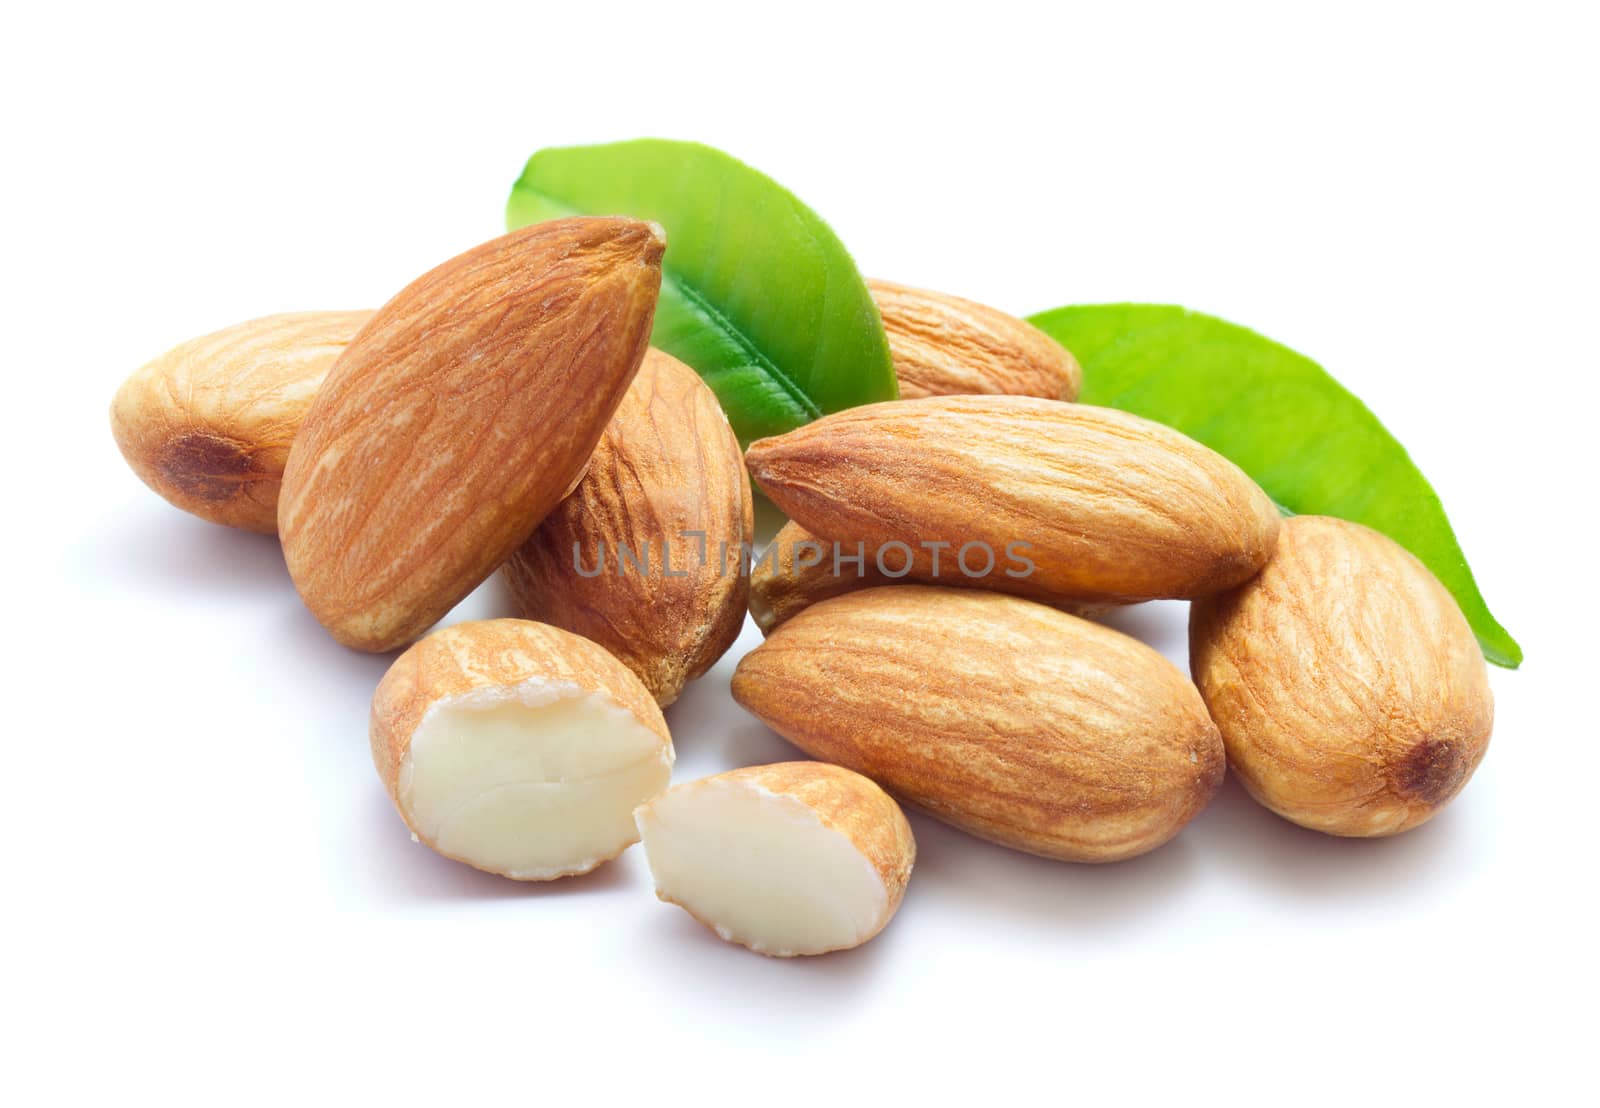 Almonds with leaves by Valengilda